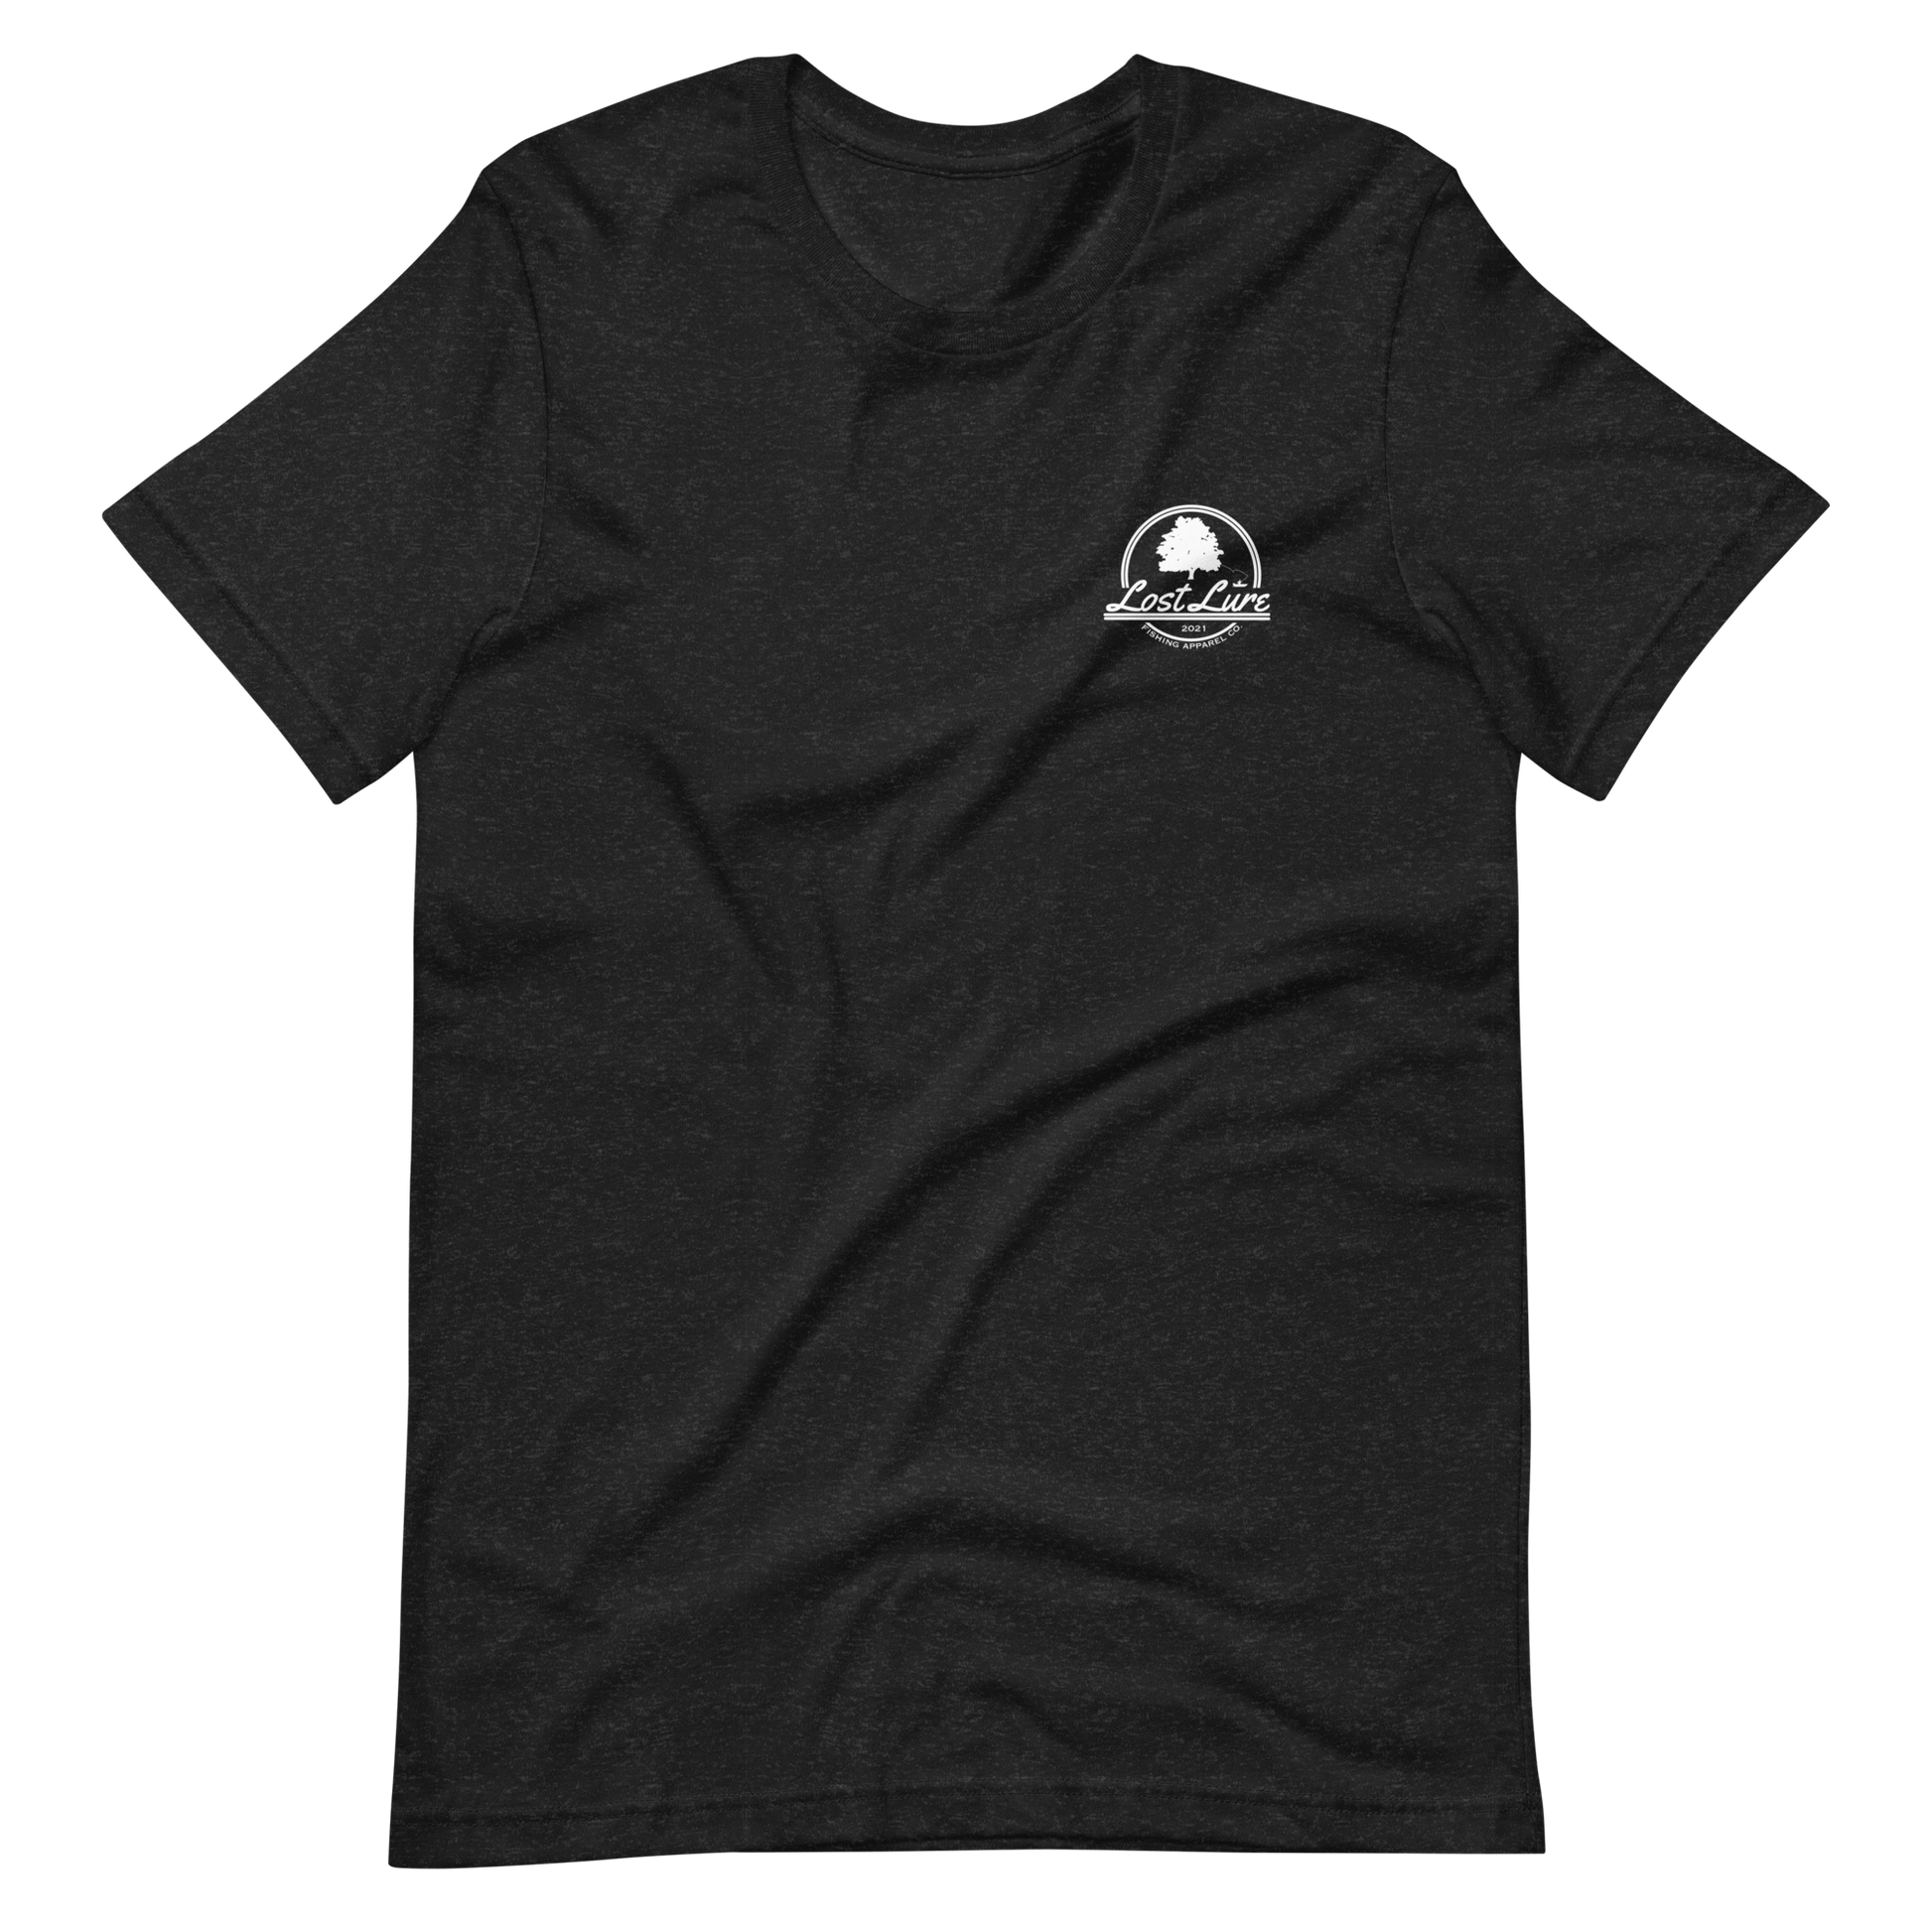 Fly fishing Lost lure shirt. It has a design on the back of the shirt black and white outline a fly fisherman and the Rocky Mountains.Dark grey fishing shirt, front side 